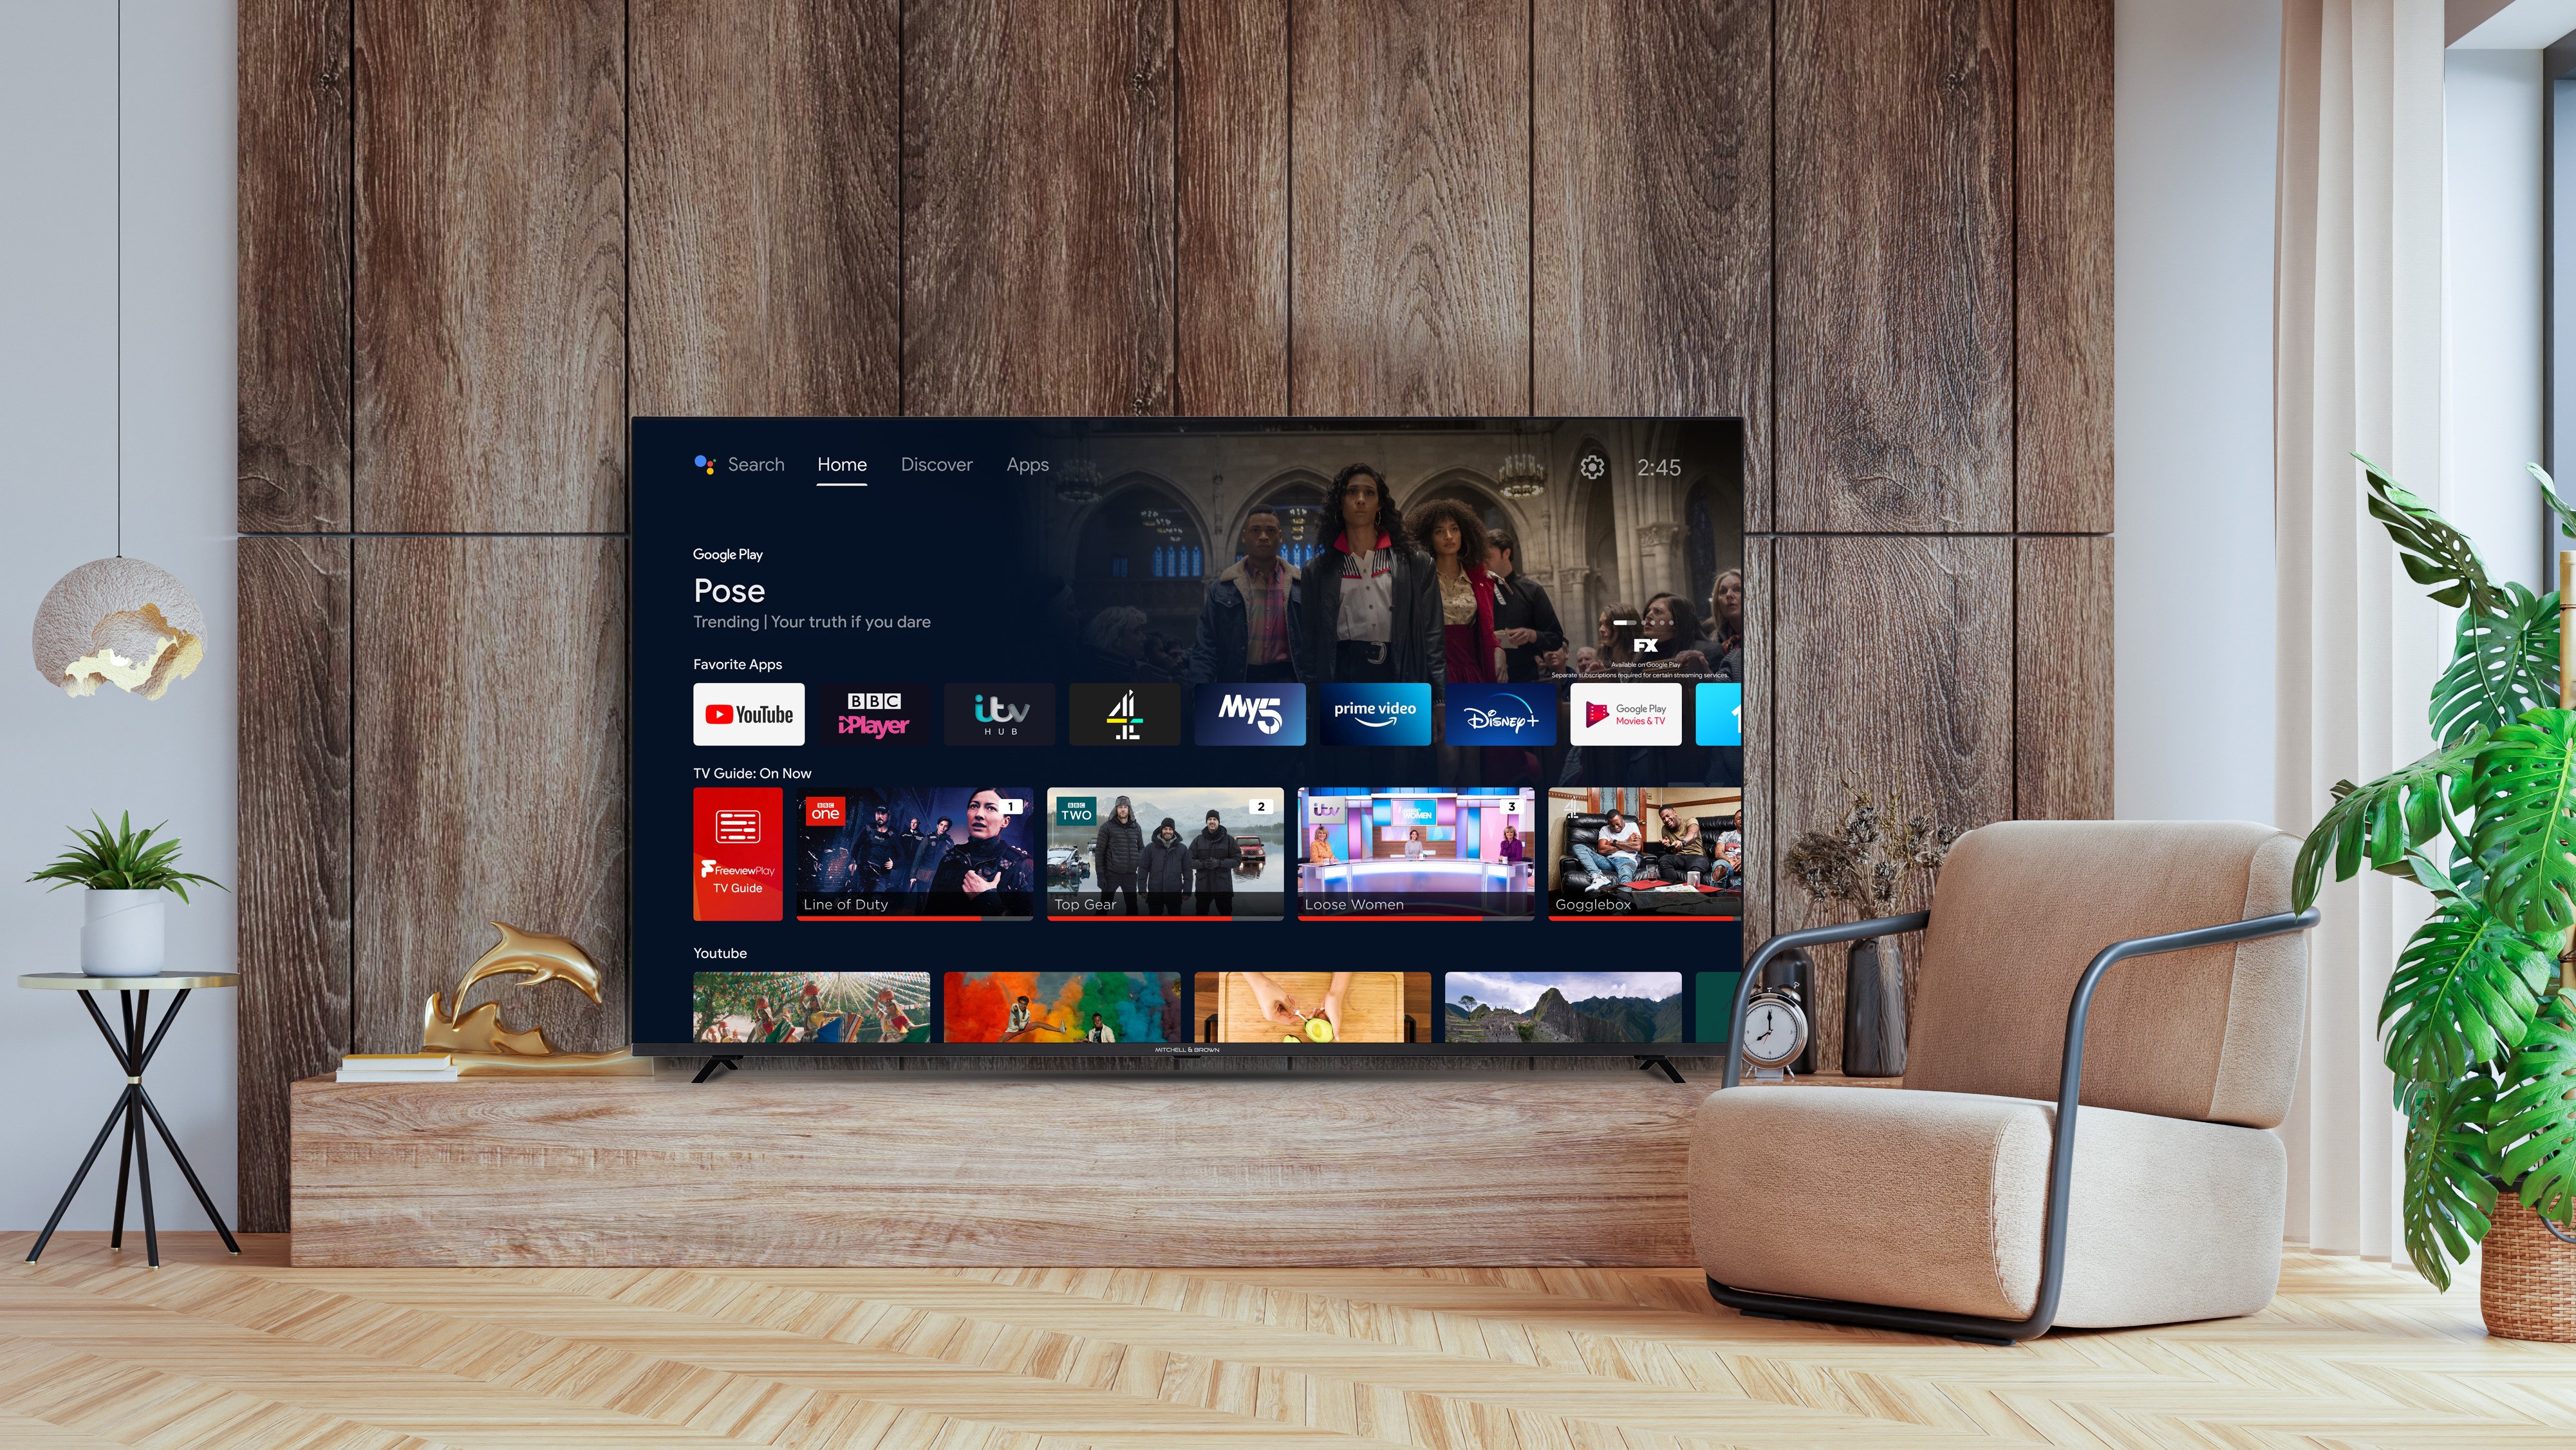 British brand Mitchell & Brown unveils 65-inch 4K Smart TV with Android TV OS | What Hi-Fi?